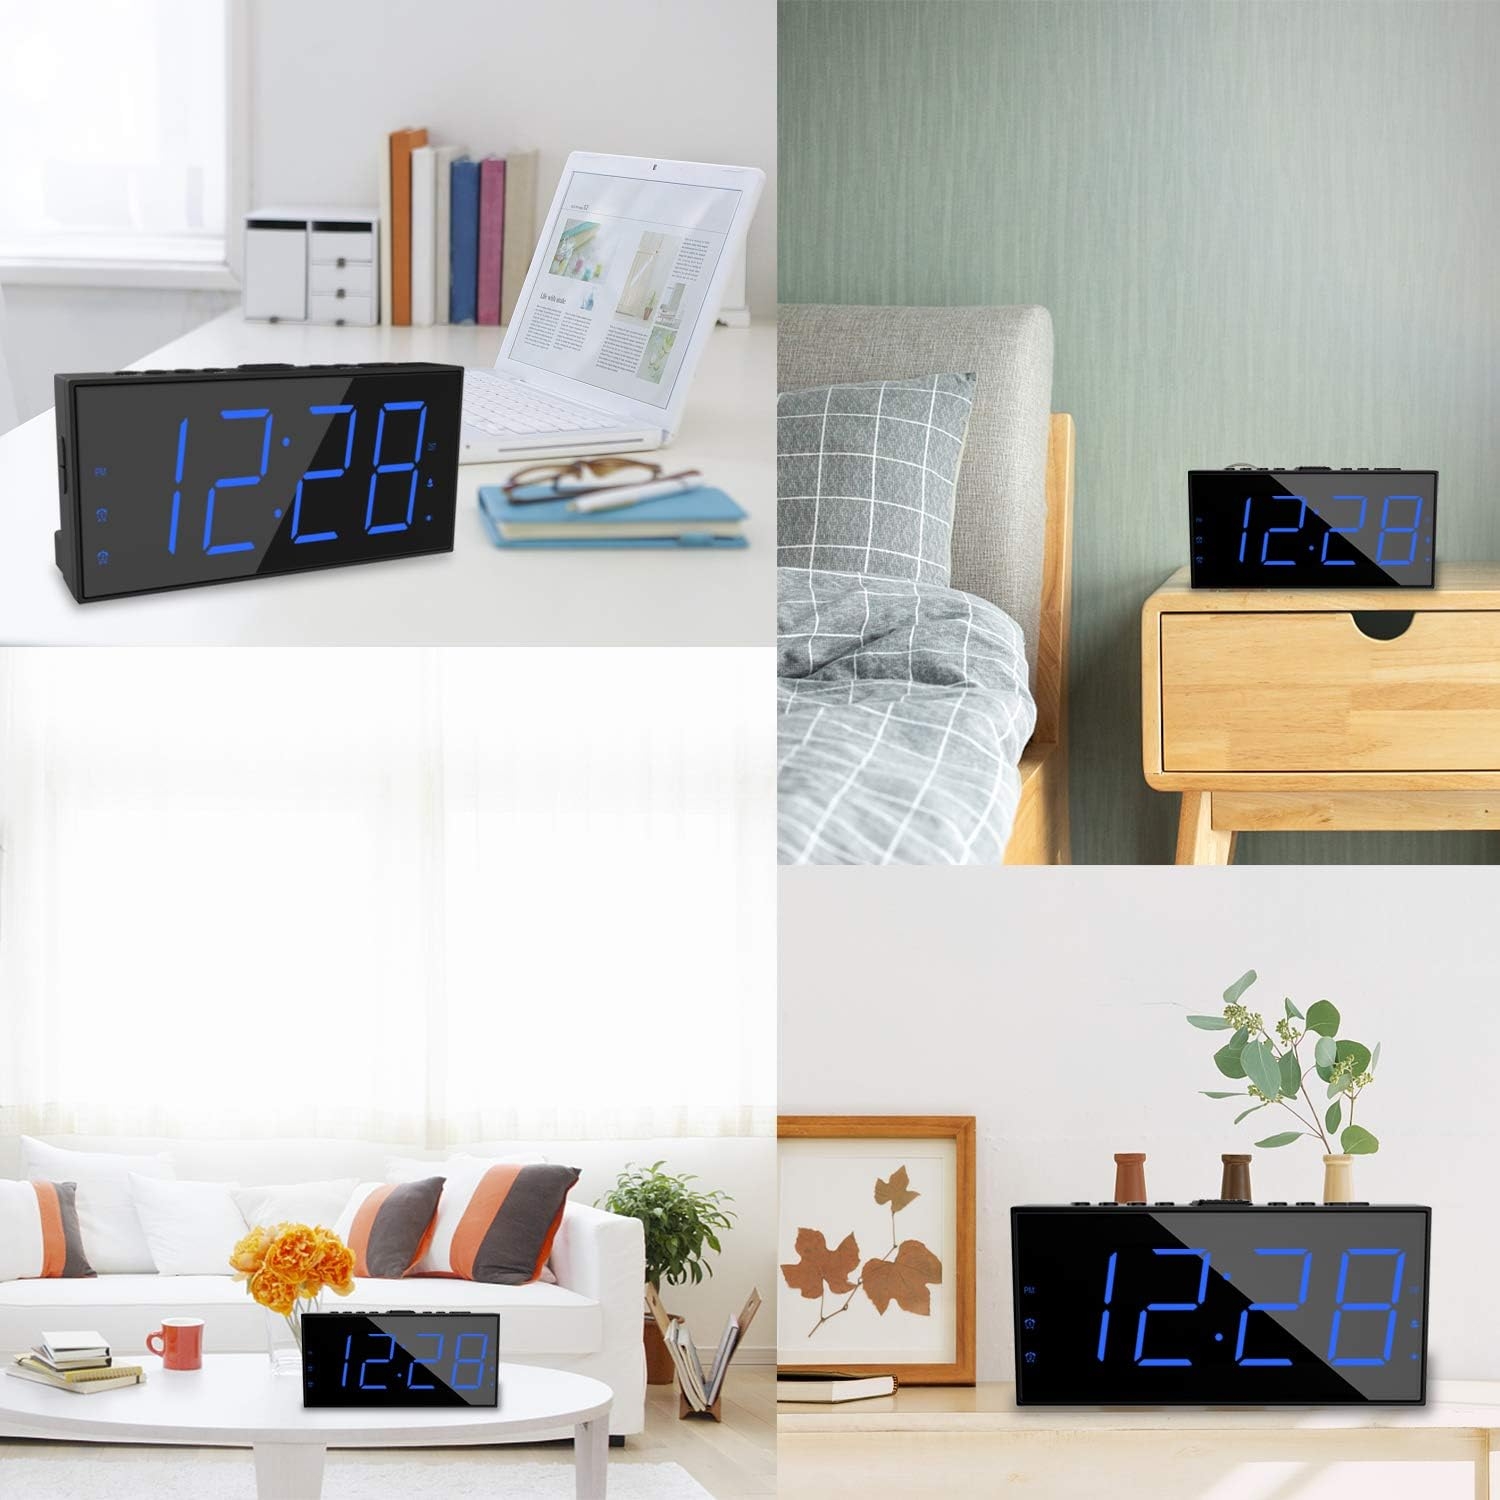 Loud Alarm Clock Vibrating with Bed Shaker for Heavy Sleepers Deaf and Hard of Hearing，Dual Alarm Clock with USB Charger, 7.5'' Large Display, Dimmer, Snooze & Battery Backup ( Blue)